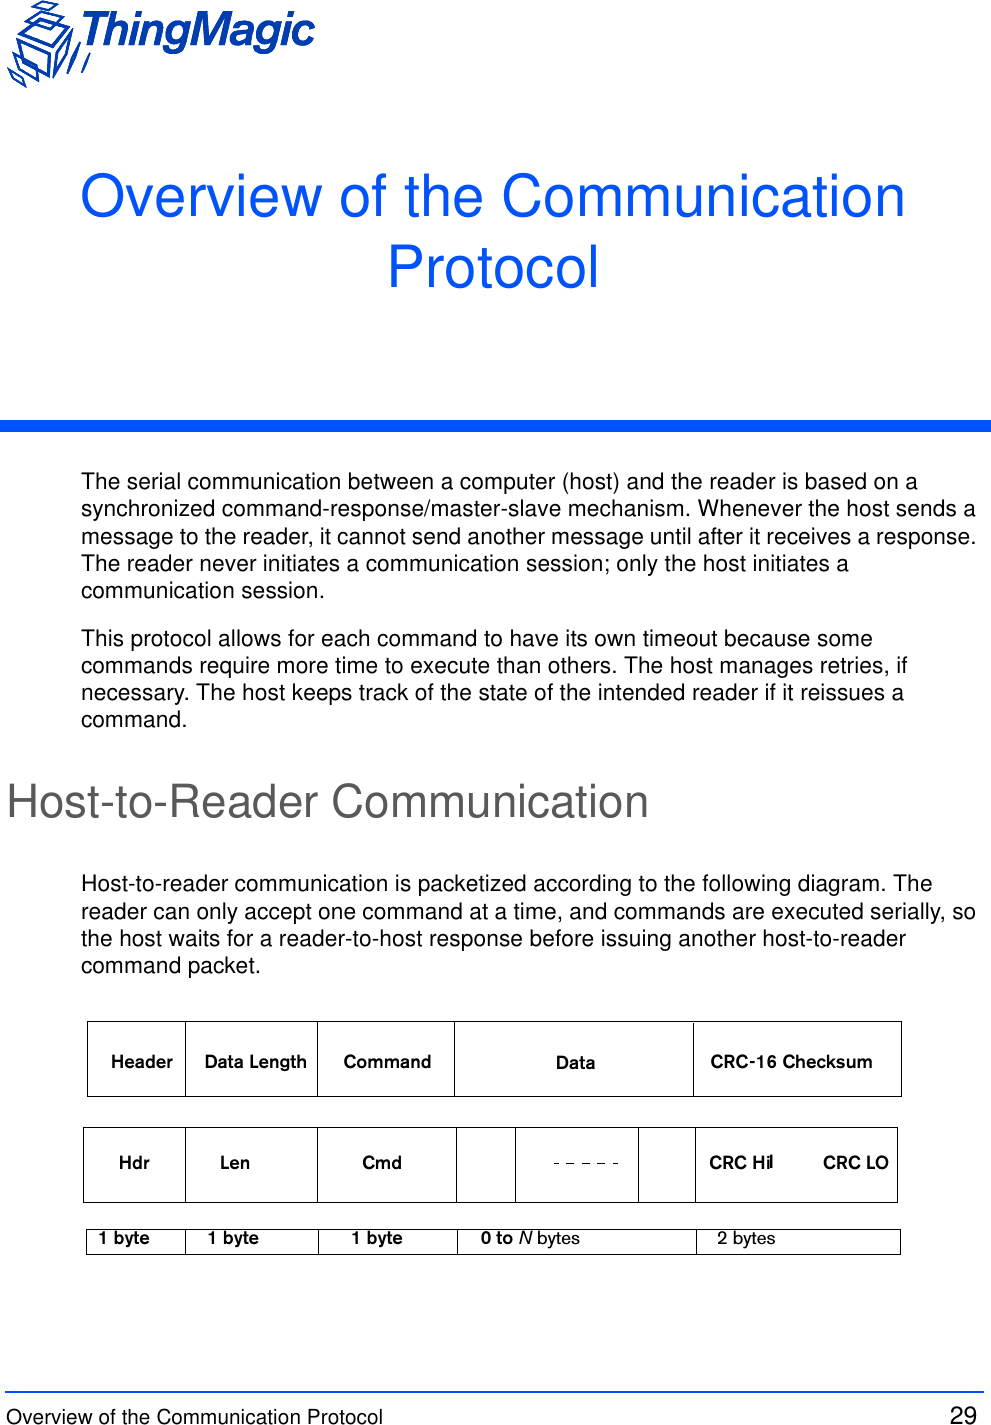 Overview of the Communication Protocol  29 Overview of the Communication ProtocolThe serial communication between a computer (host) and the reader is based on a synchronized command-response/master-slave mechanism. Whenever the host sends a message to the reader, it cannot send another message until after it receives a response. The reader never initiates a communication session; only the host initiates a communication session. This protocol allows for each command to have its own timeout because some commands require more time to execute than others. The host manages retries, if necessary. The host keeps track of the state of the intended reader if it reissues a command.Host-to-Reader CommunicationHost-to-reader communication is packetized according to the following diagram. The reader can only accept one command at a time, and commands are executed serially, so the host waits for a reader-to-host response before issuing another host-to-reader command packet. Header Data Length Command Data CRC-16 ChecksumHdr Len Cmd CRC Hi CRC LOI1 byte 1 byte 1 byte 0 to N bytes 2 bytes